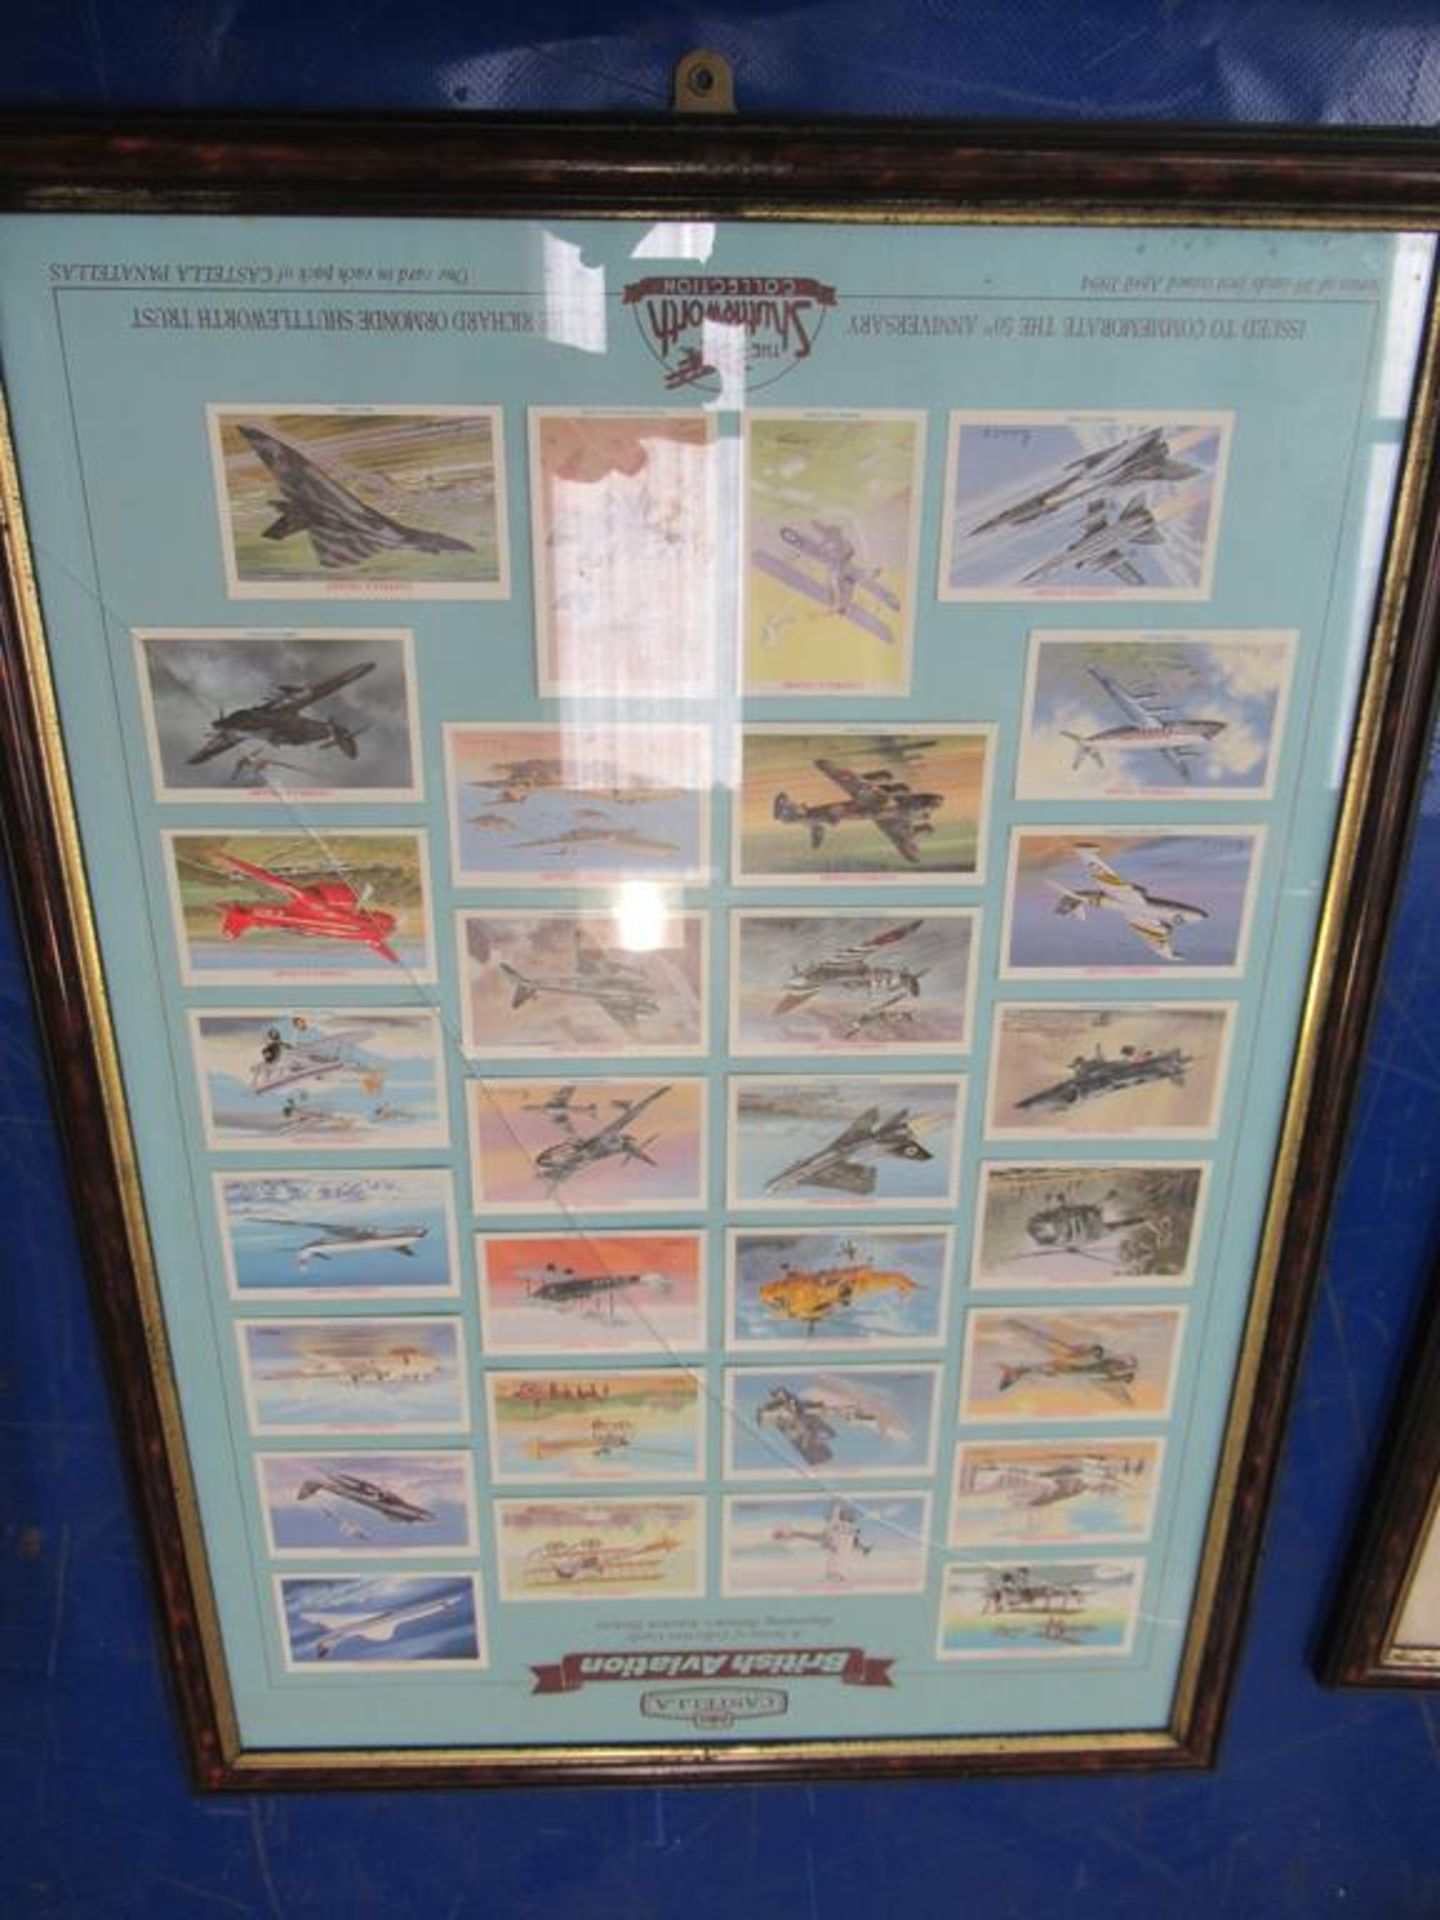 4 x Castella Panatellas framed cigar card collections to include racing cars and aeroplanes etc. - Image 4 of 4